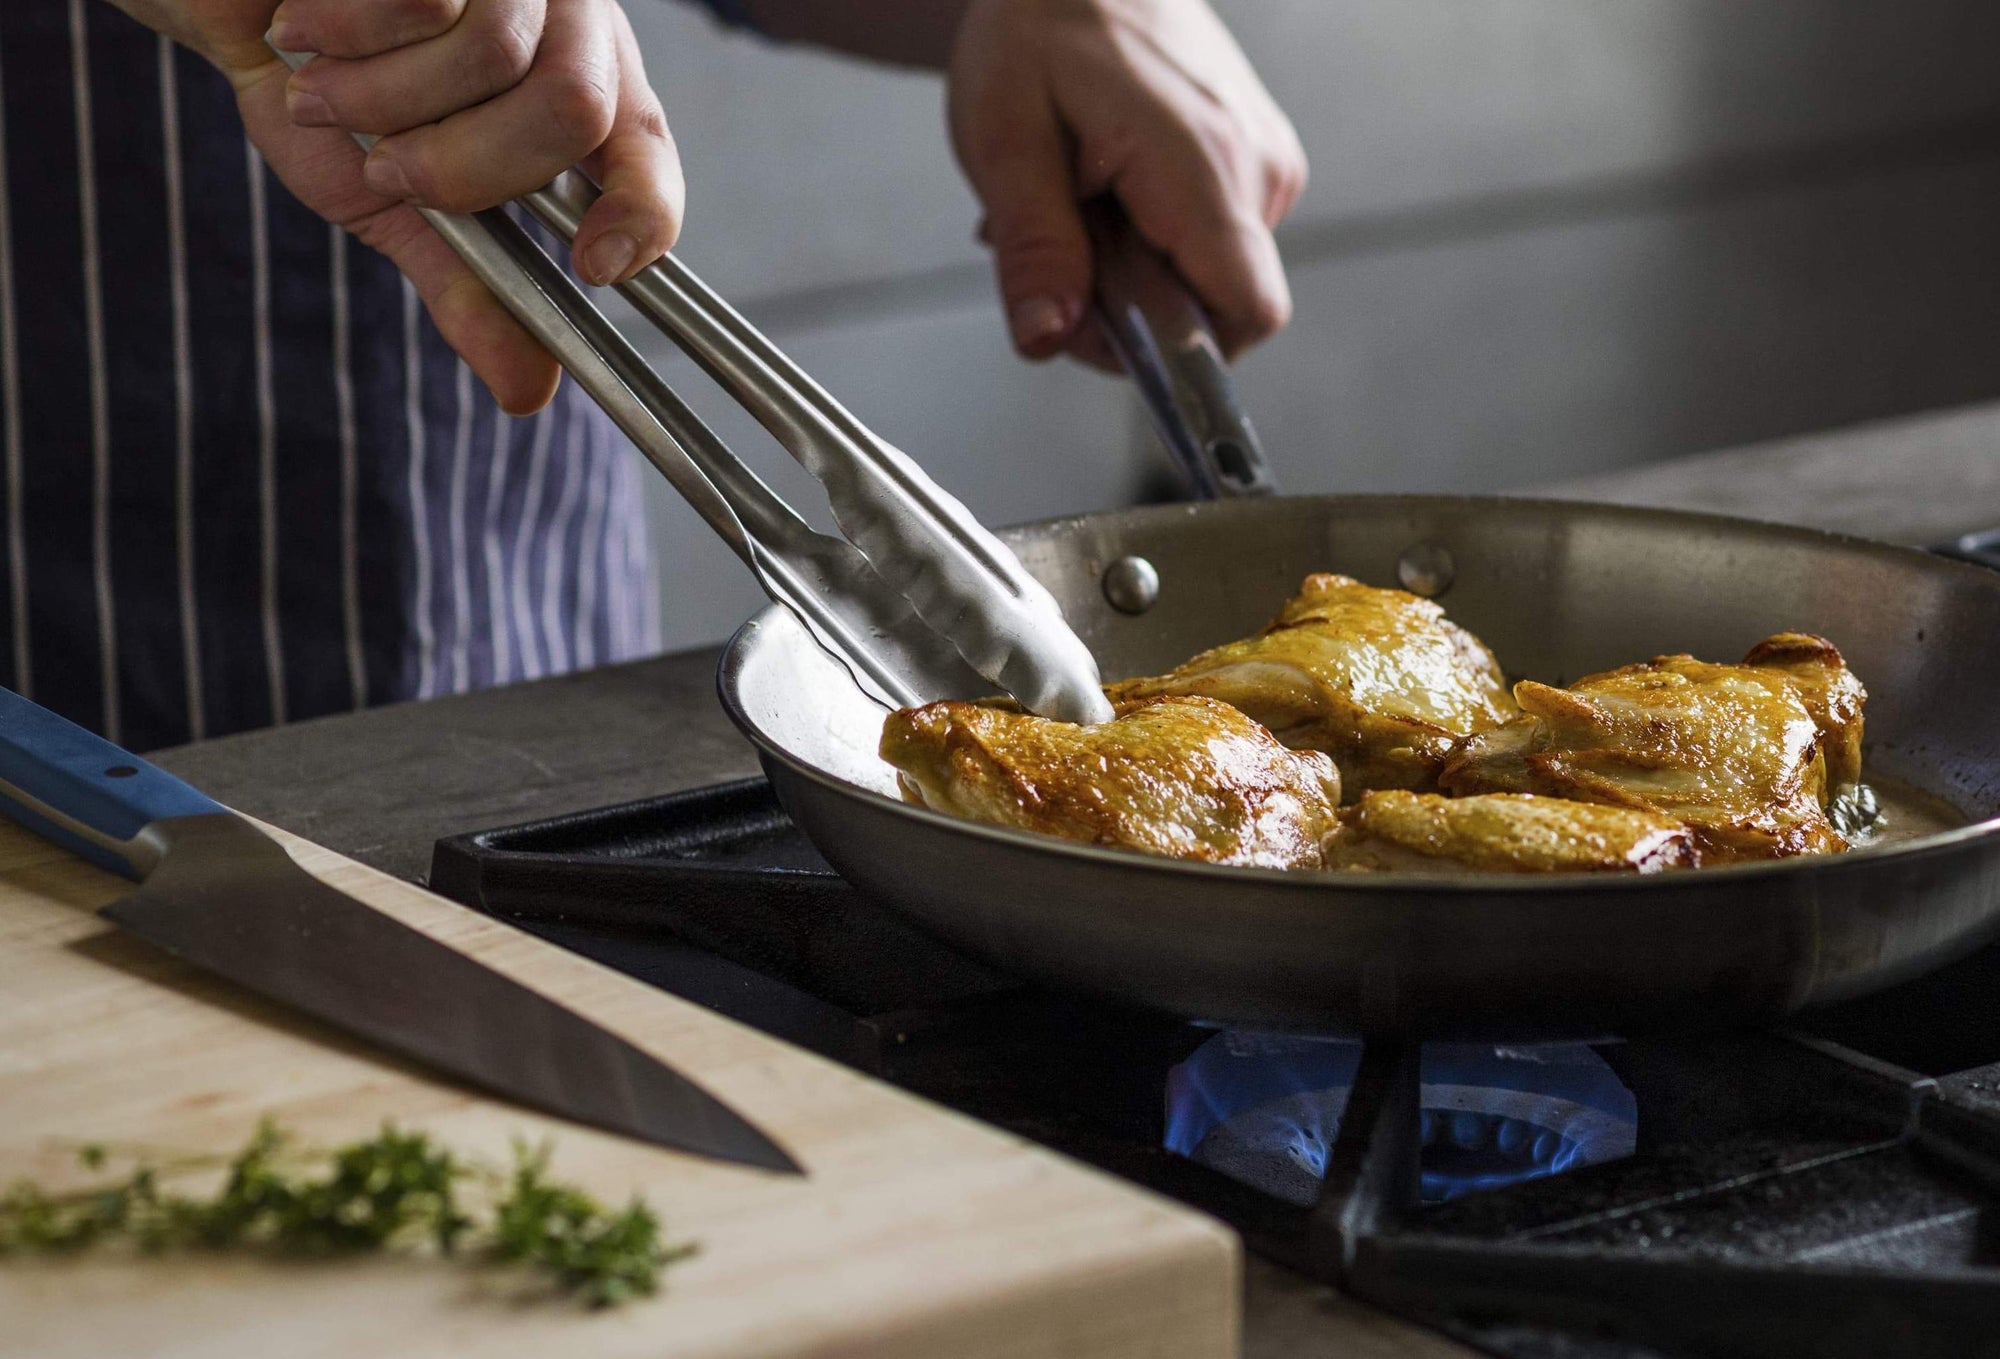 Skillet pan: A chef prepares chicken thighs in a stainless steel skillet